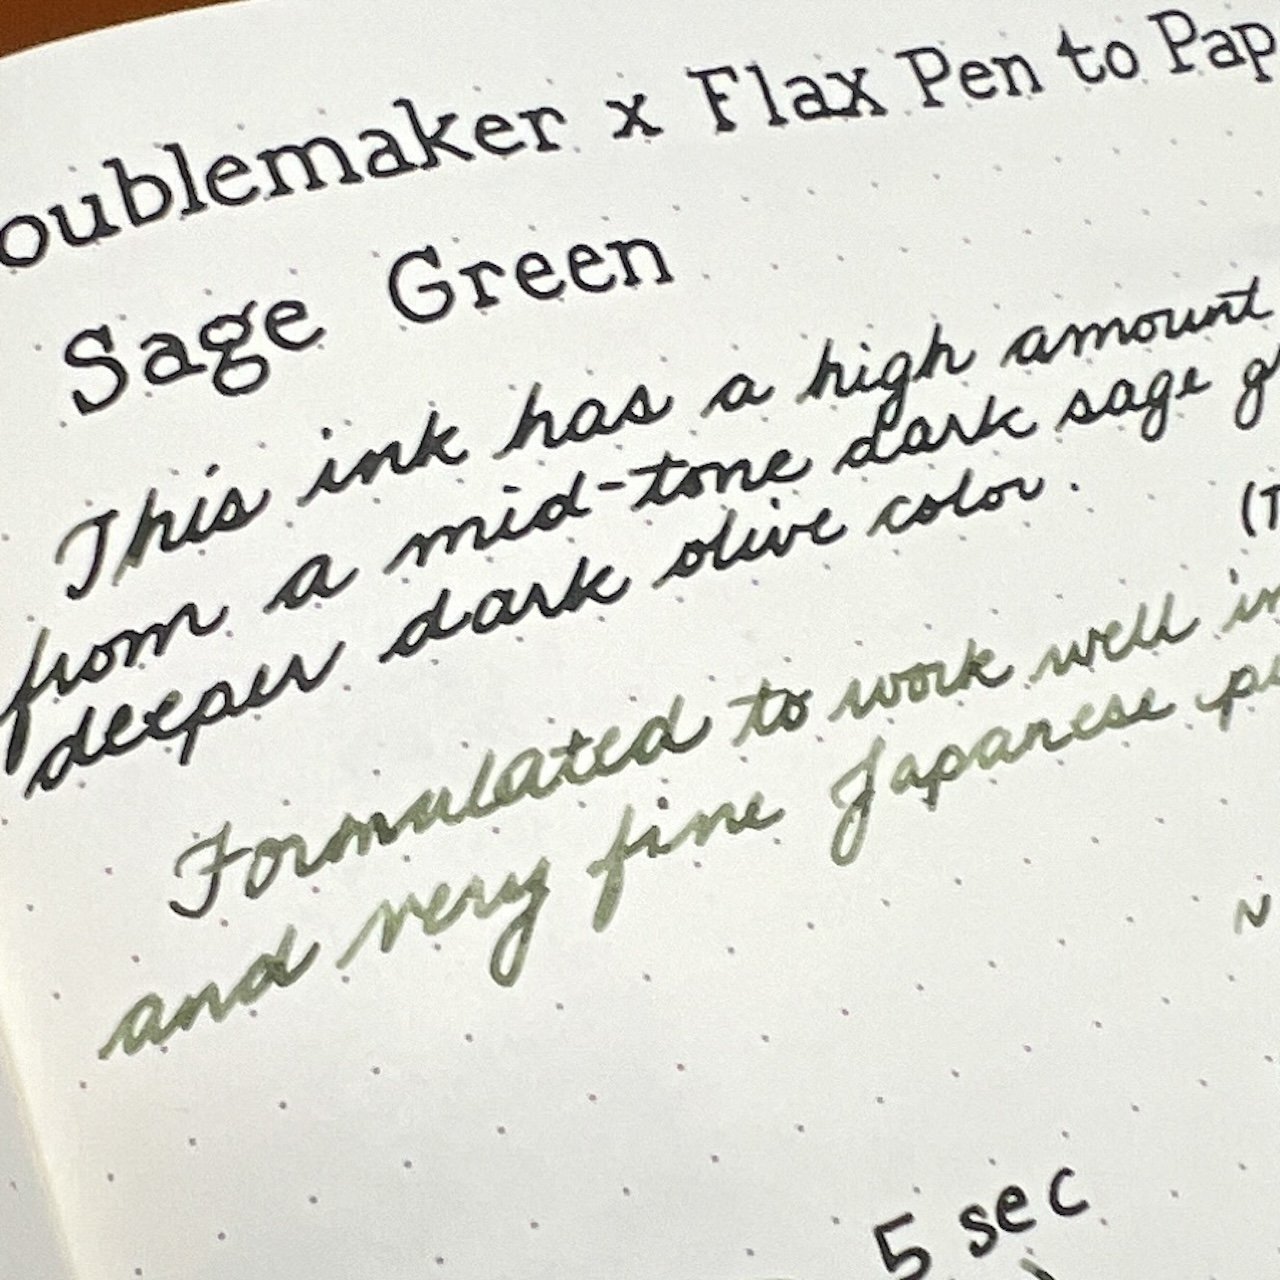 ASK FLAX - Will all inks work in a fountain pen? Why not? - FLAX art &  design